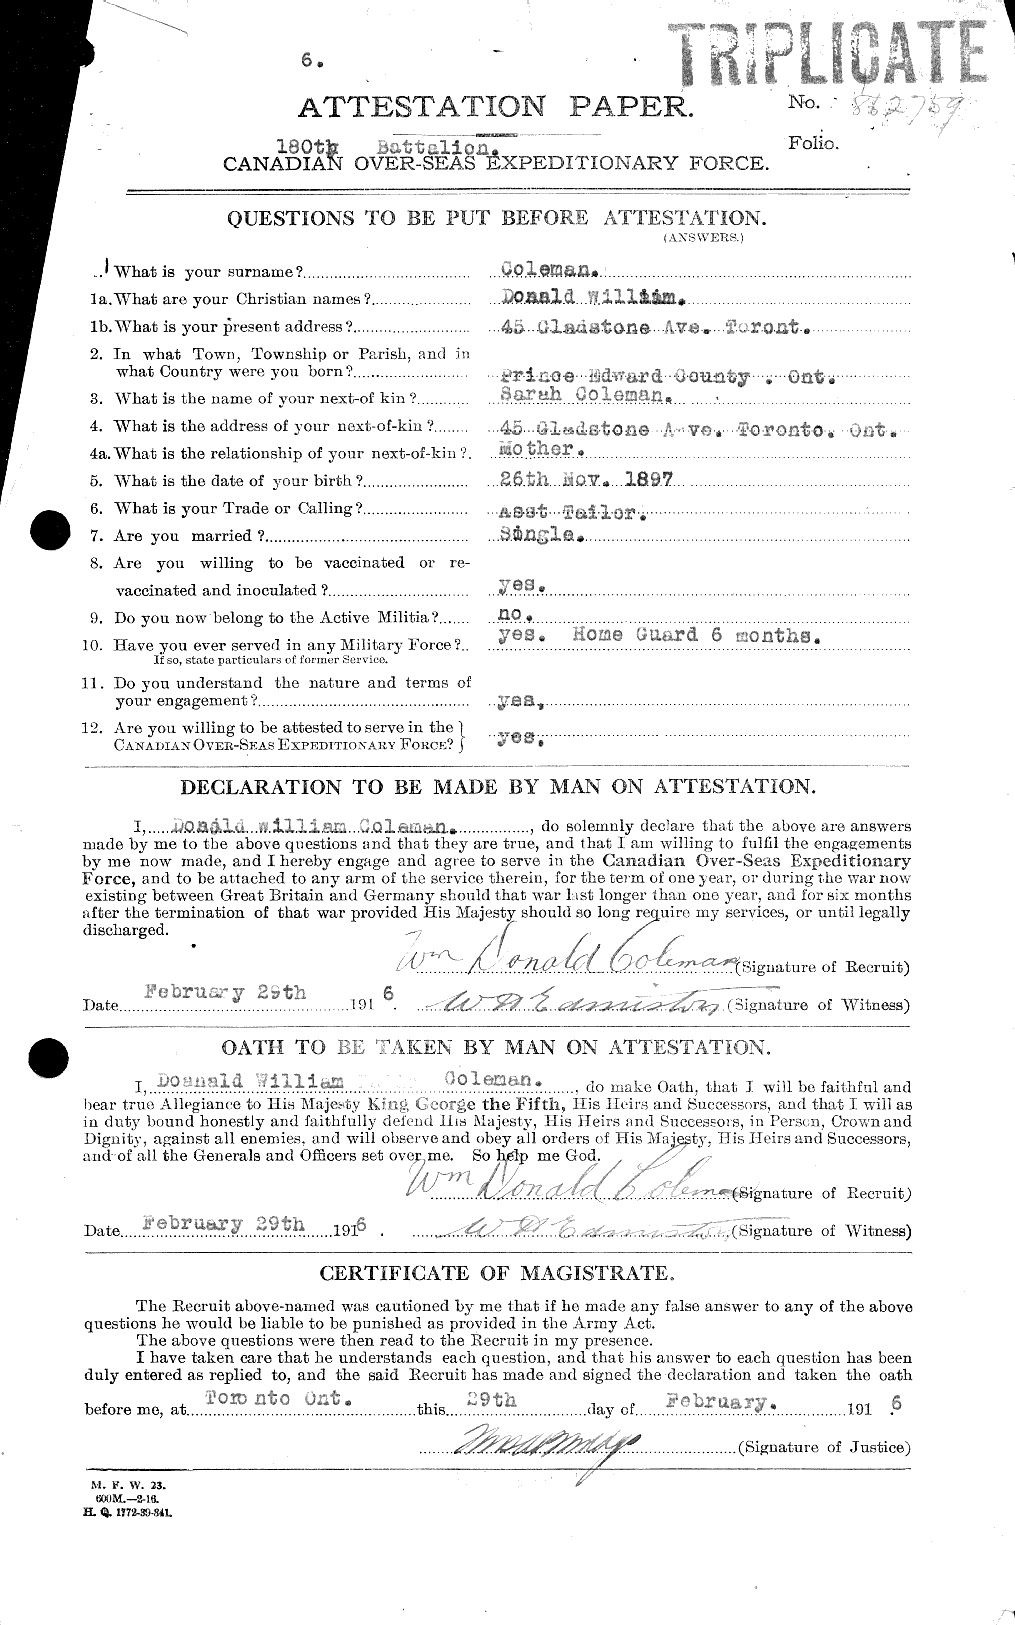 Personnel Records of the First World War - CEF 028303a